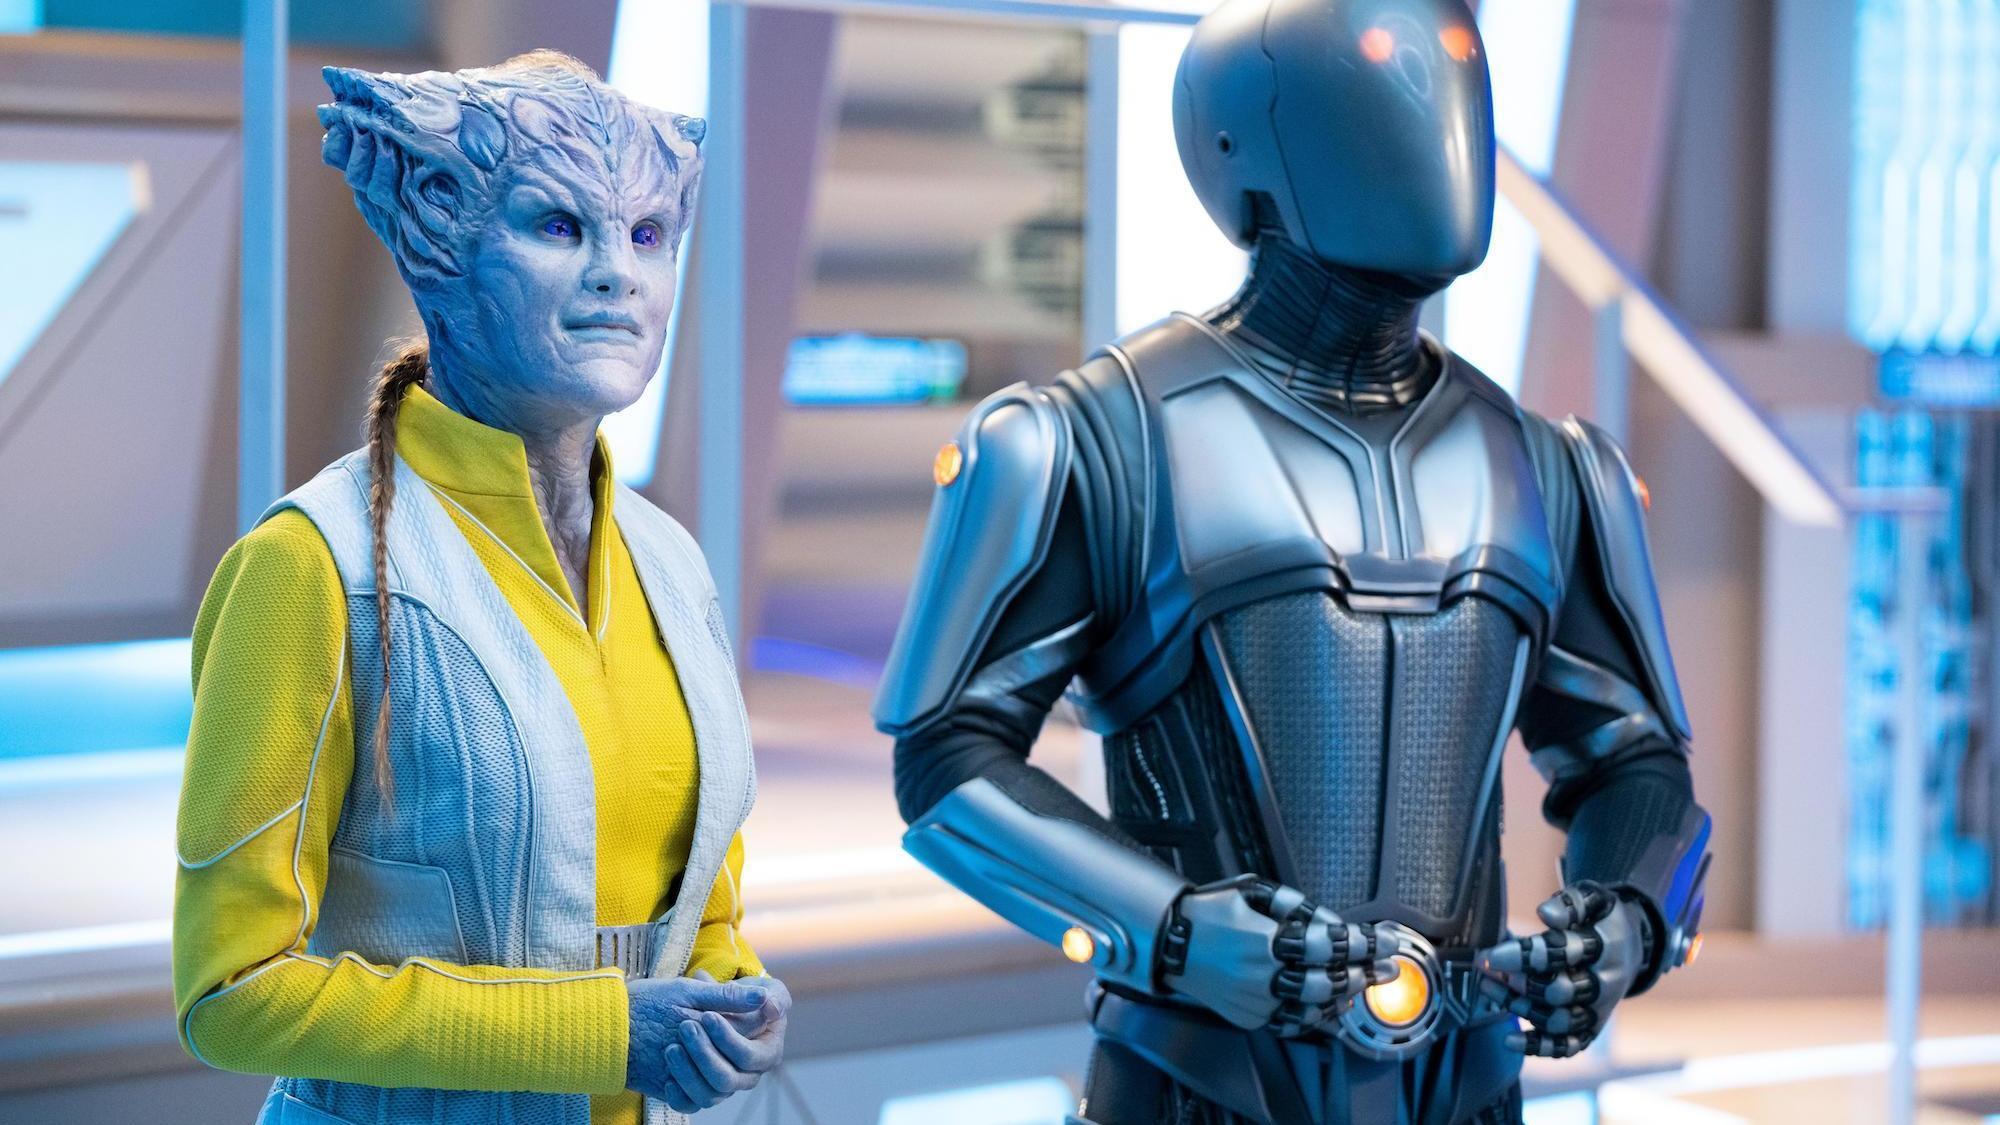 The Orville: New Horizons -- “From Unknown Graves” - Episode 307 -- The Orville discovers a Kaylon with a very special ability. Dr. Villka (Eliza Taylor) and Isaac (Mark Jackson), shown. (Photo by: Greg Gayne/Hulu)